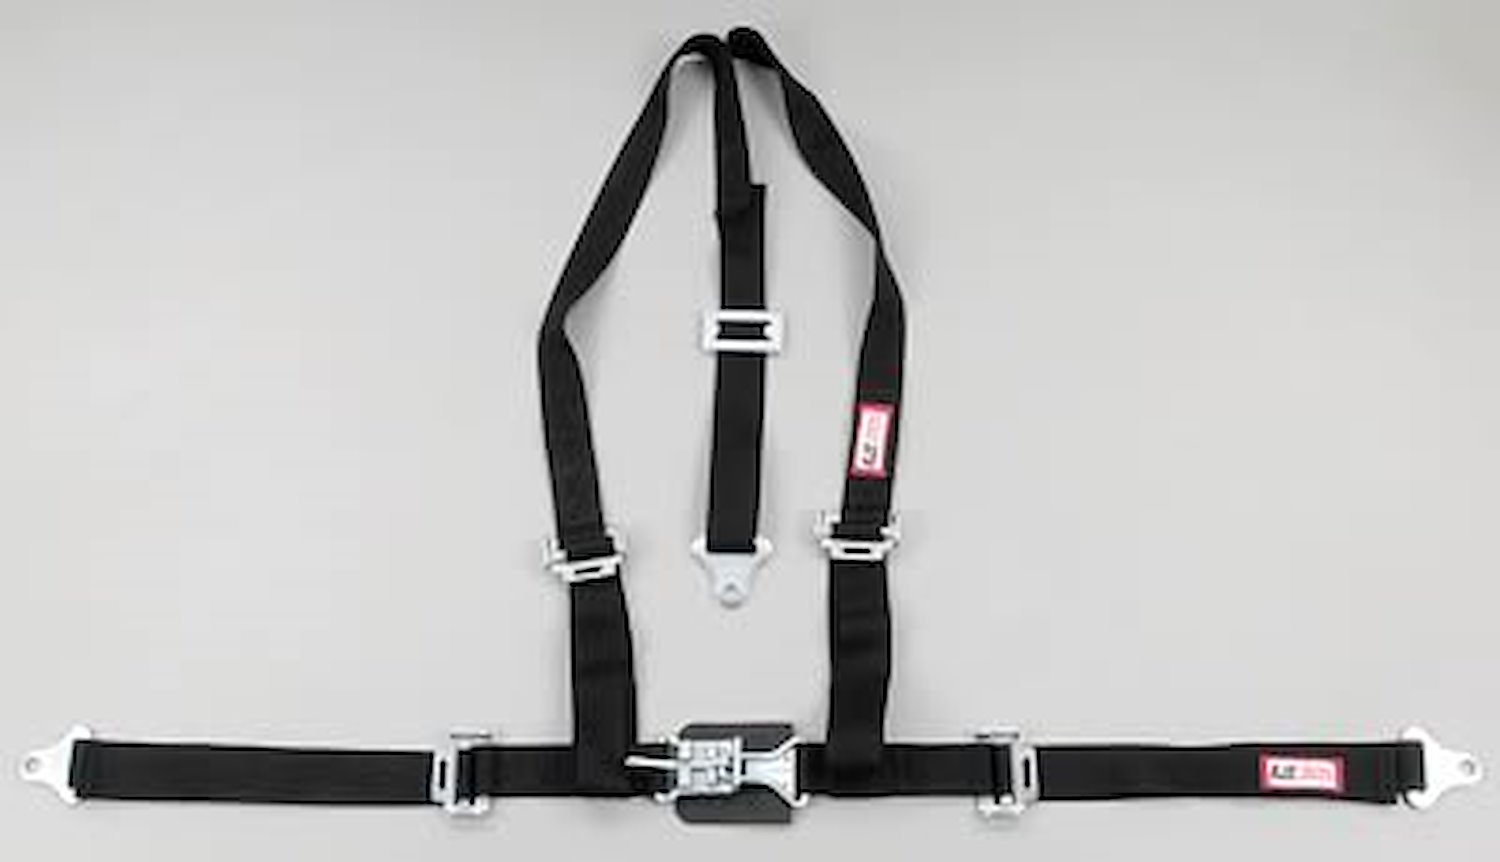 NON-SFI L&L HARNESS 2 PULL UP Lap Belt BOLT SEWN IN 2 S.H. INDIVIDUAL FLOOR Mount w/STERNUM STRAP WRAP/BOLT HOT PINK